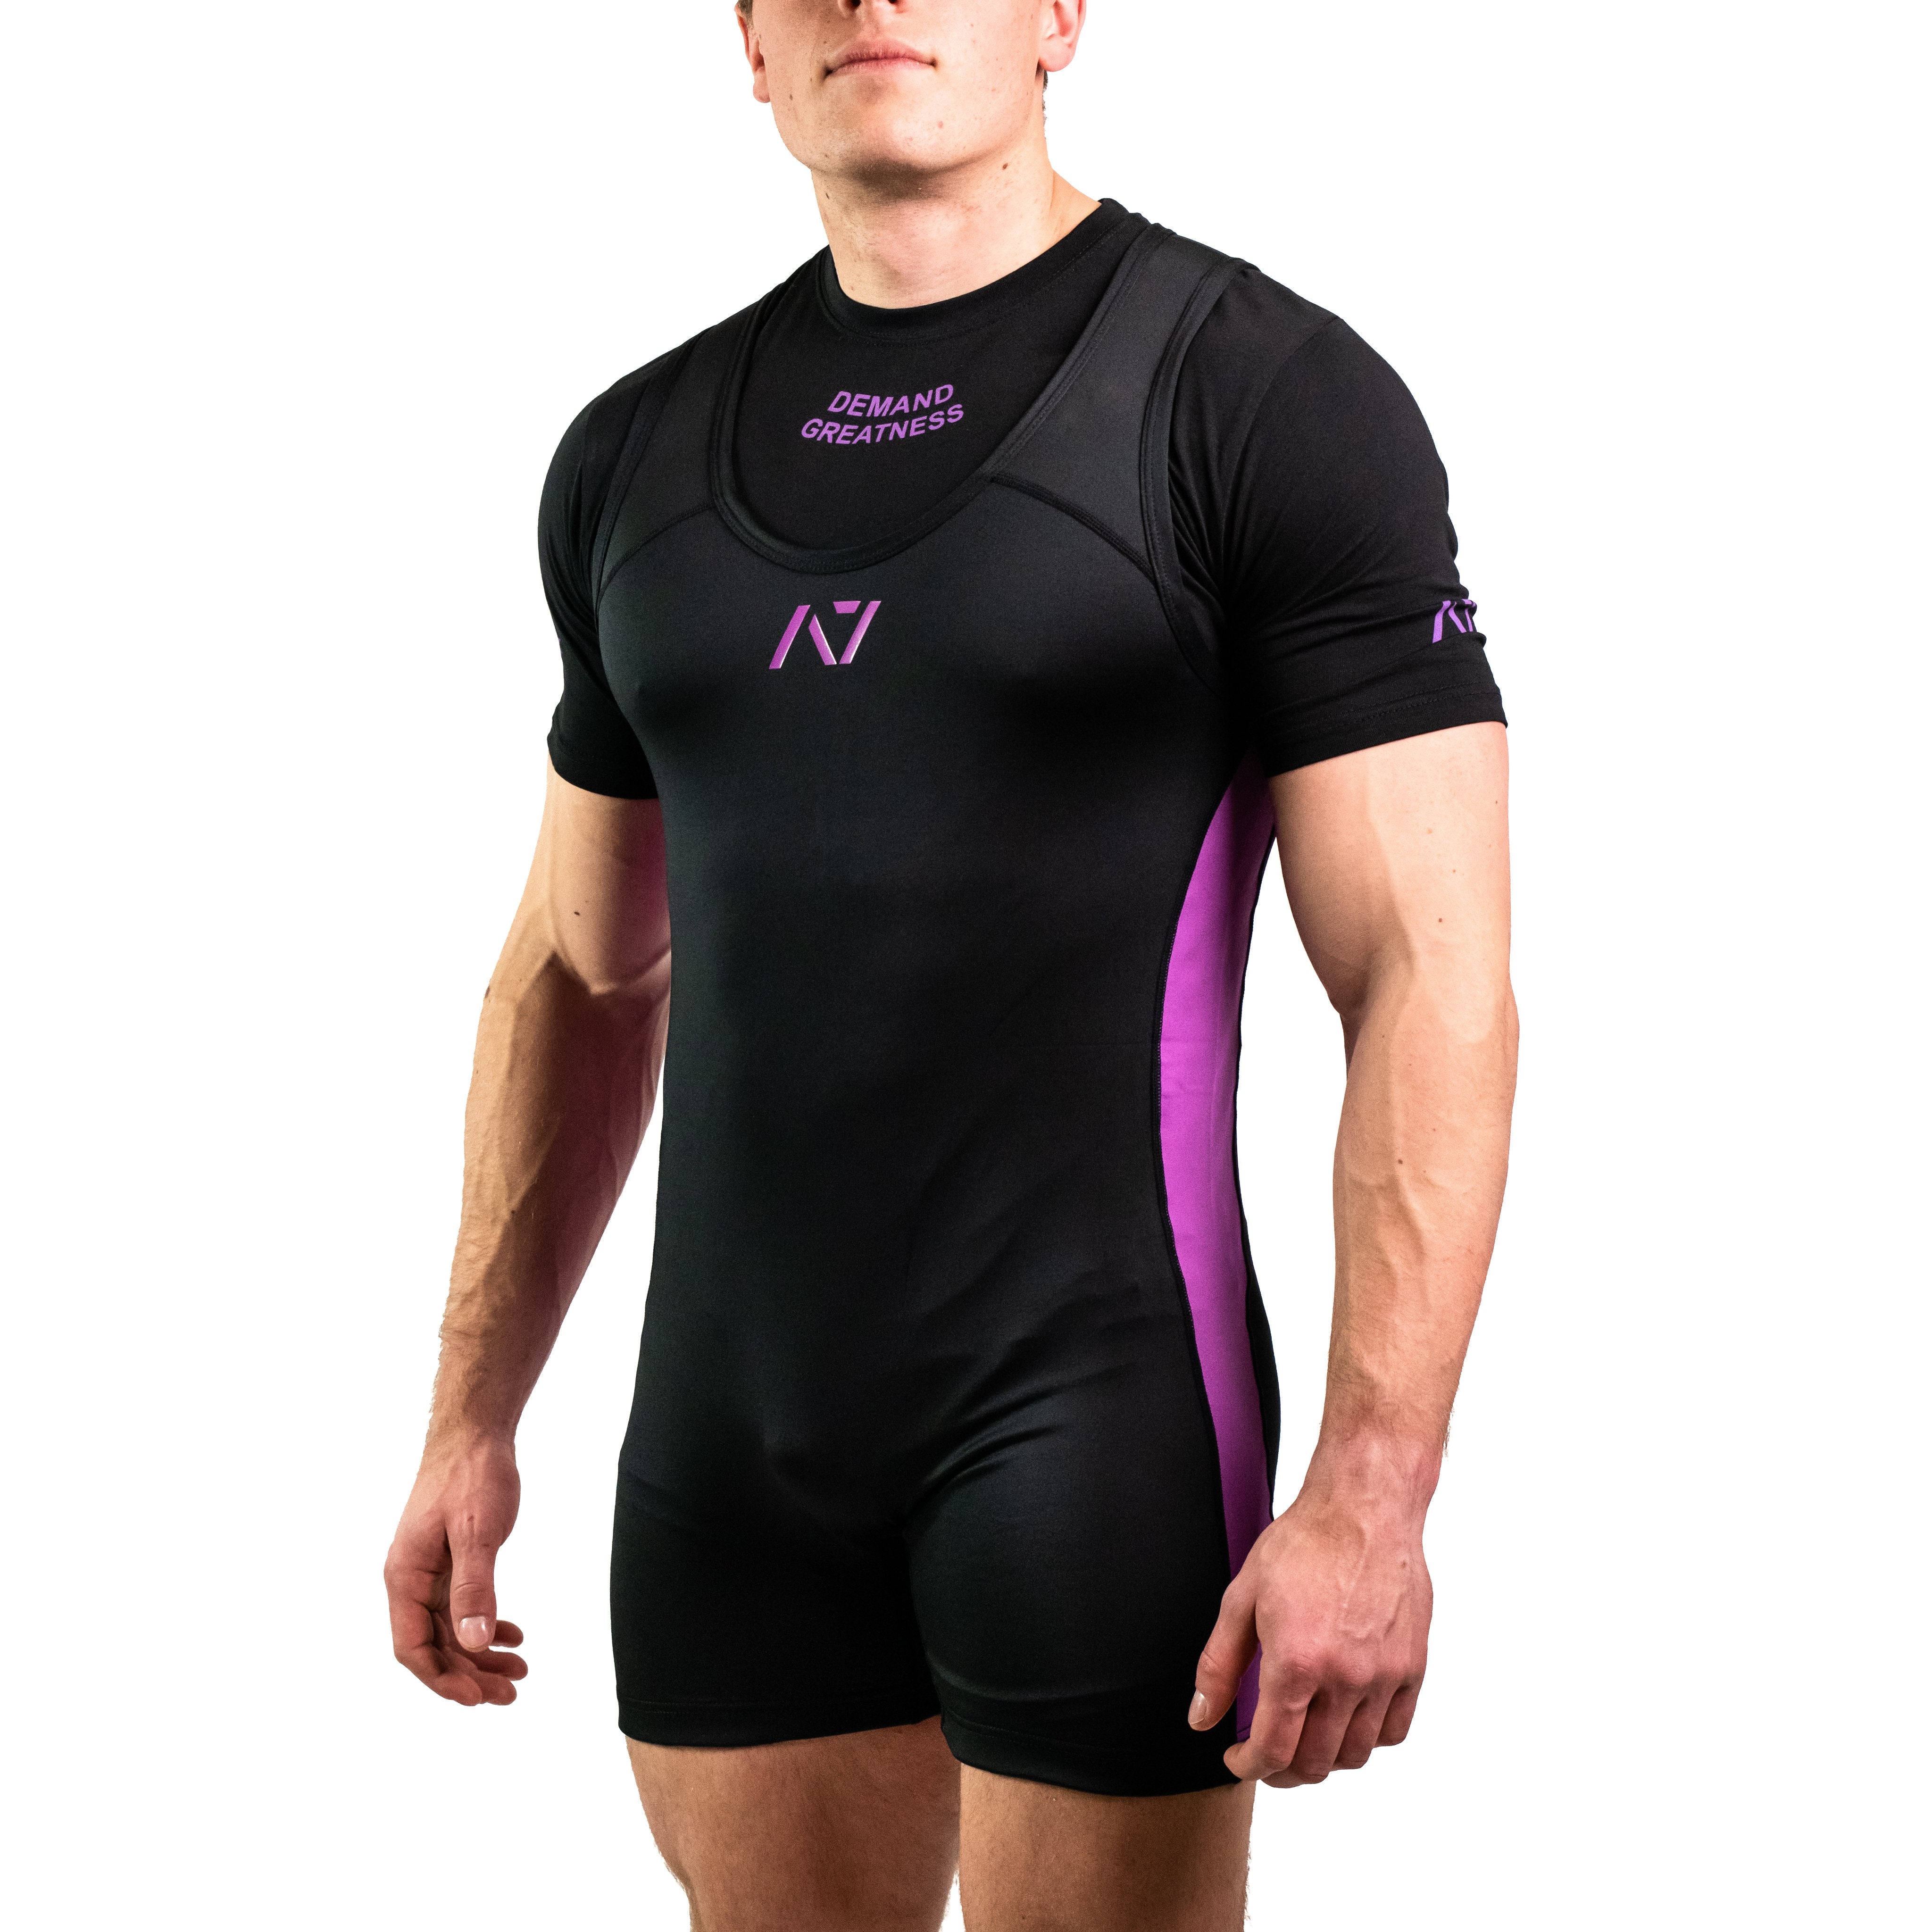 A7 IPF Approved Powerlifting Singlet is designed exclusively for powerlifting. It is very comfortable to wear and feels soft on bare skin. A7 Powerlifting Singlet is made from breathable fabric and provides compression during your lifts. The perfect piece of IPF Approved Kit! A7 Europe shipping to EU including France, Italy, Poland, Sweden, Netherlands.